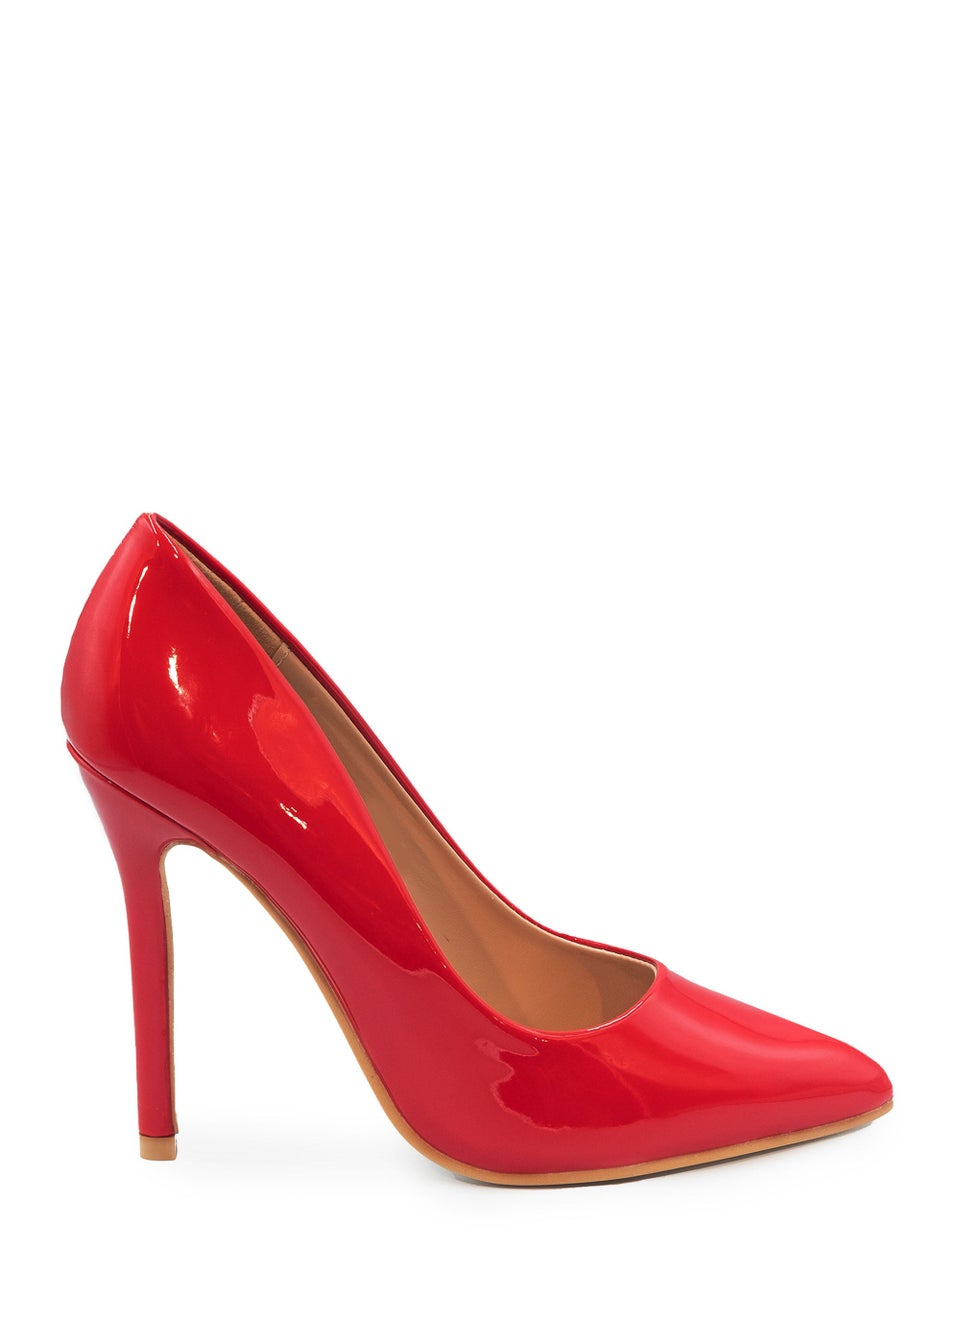 Where's That From Kyra Red Patent High Heel Pumps